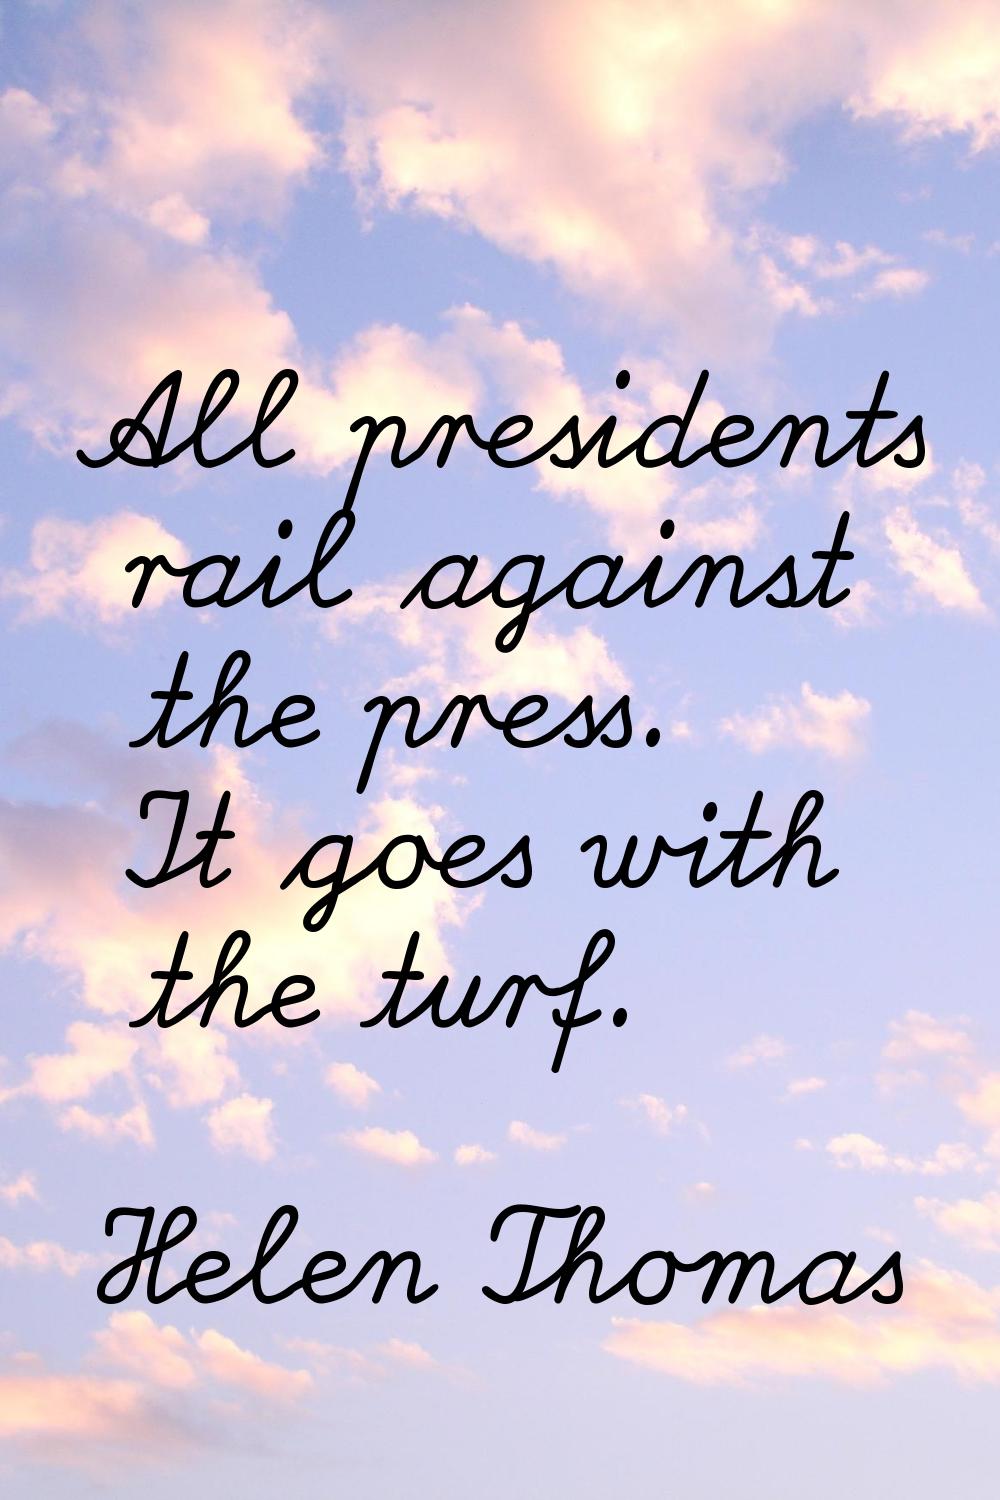 All presidents rail against the press. It goes with the turf.